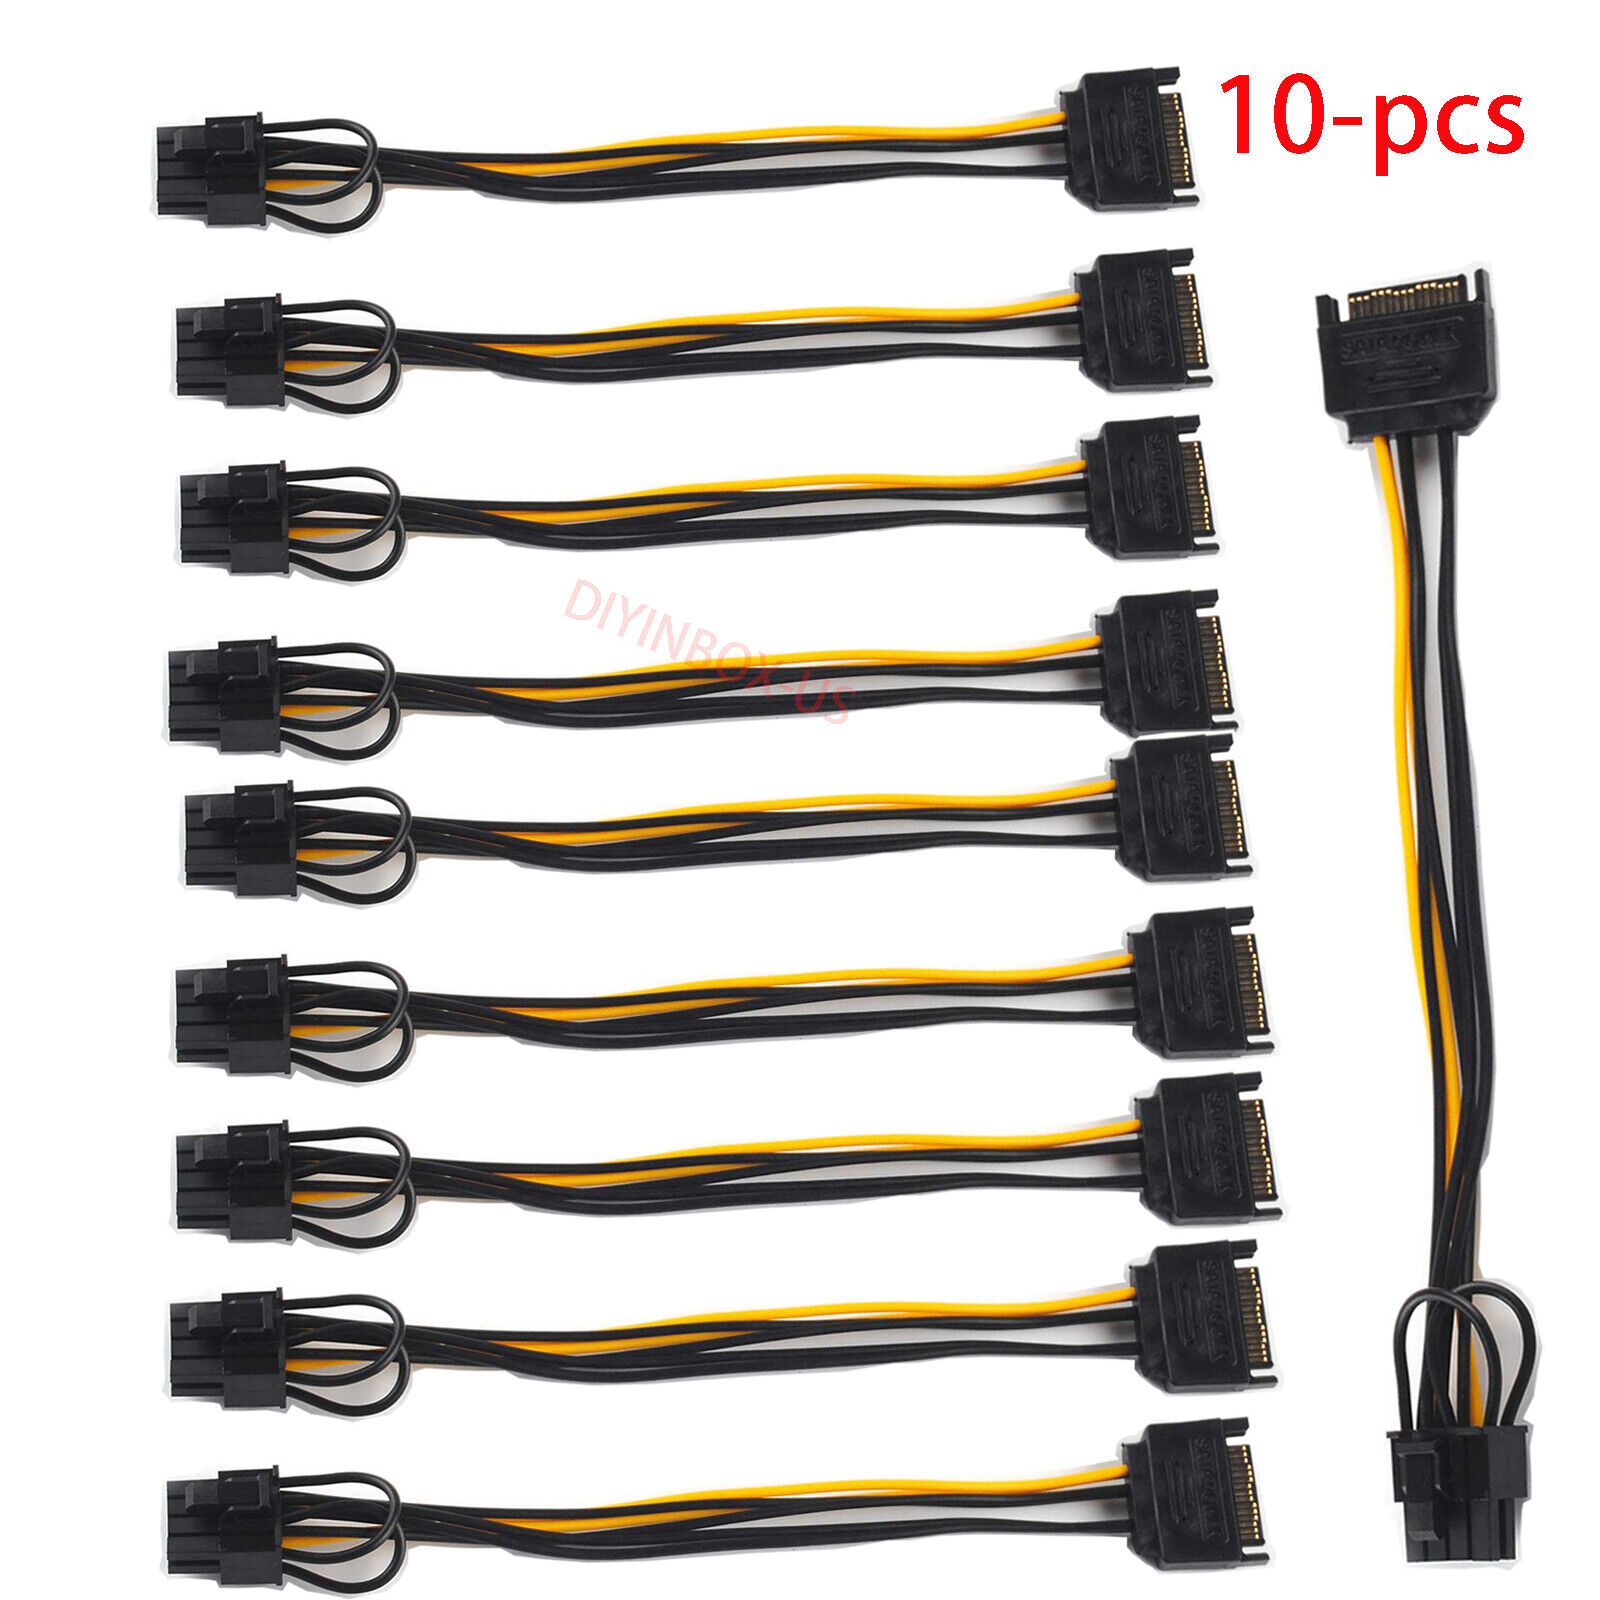 10-pack SATA 15 pin Male to 8 pin 6+2 PCI-E GPU Graphic Video Power Supply Cable